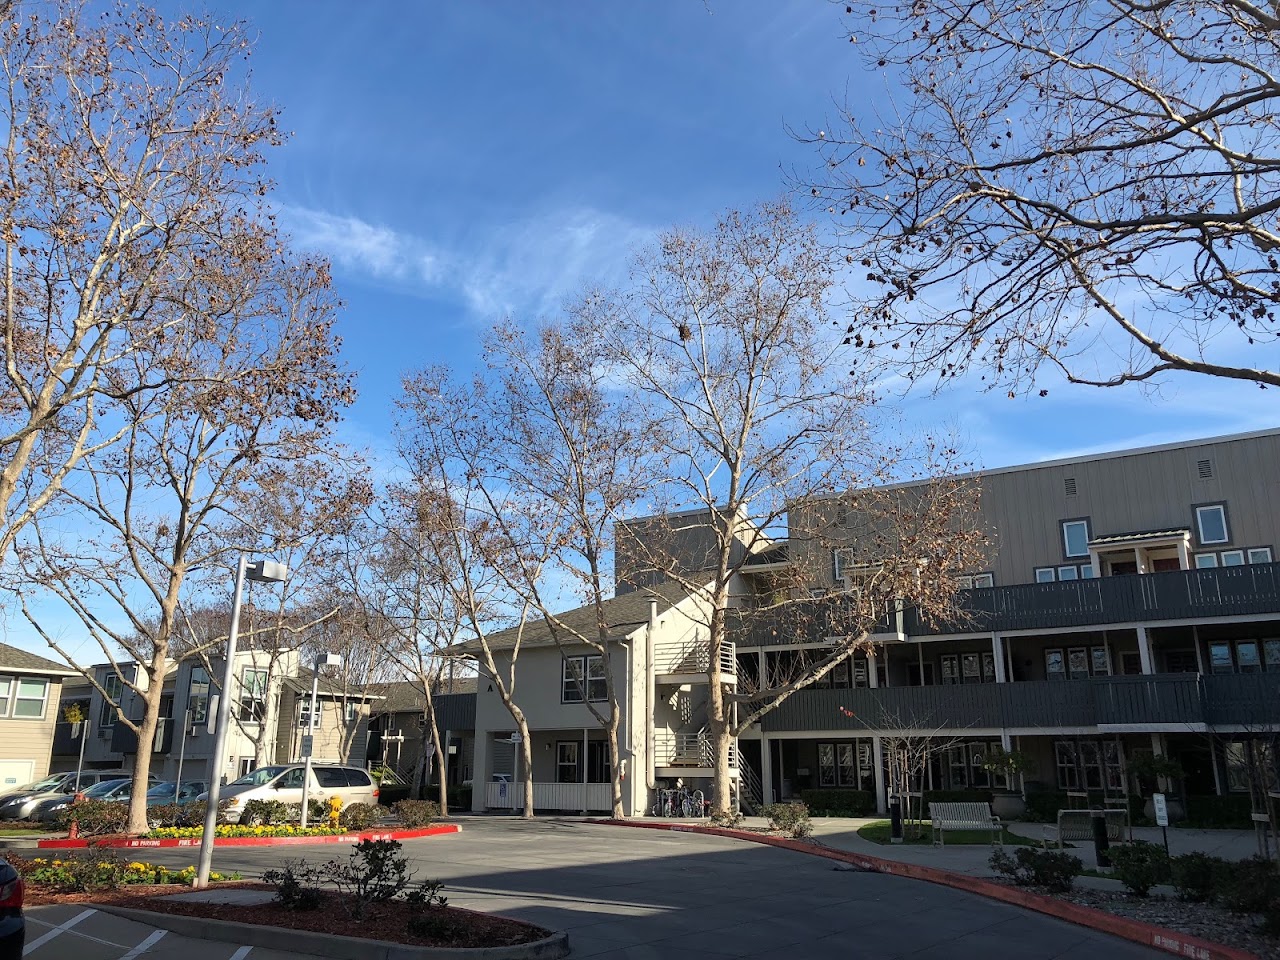 Photo of KLEIN SCHOOL SITE SENIOR HOUSING. Affordable housing located at 375 OAKTREE DR MOUNTAIN VIEW, CA 94040